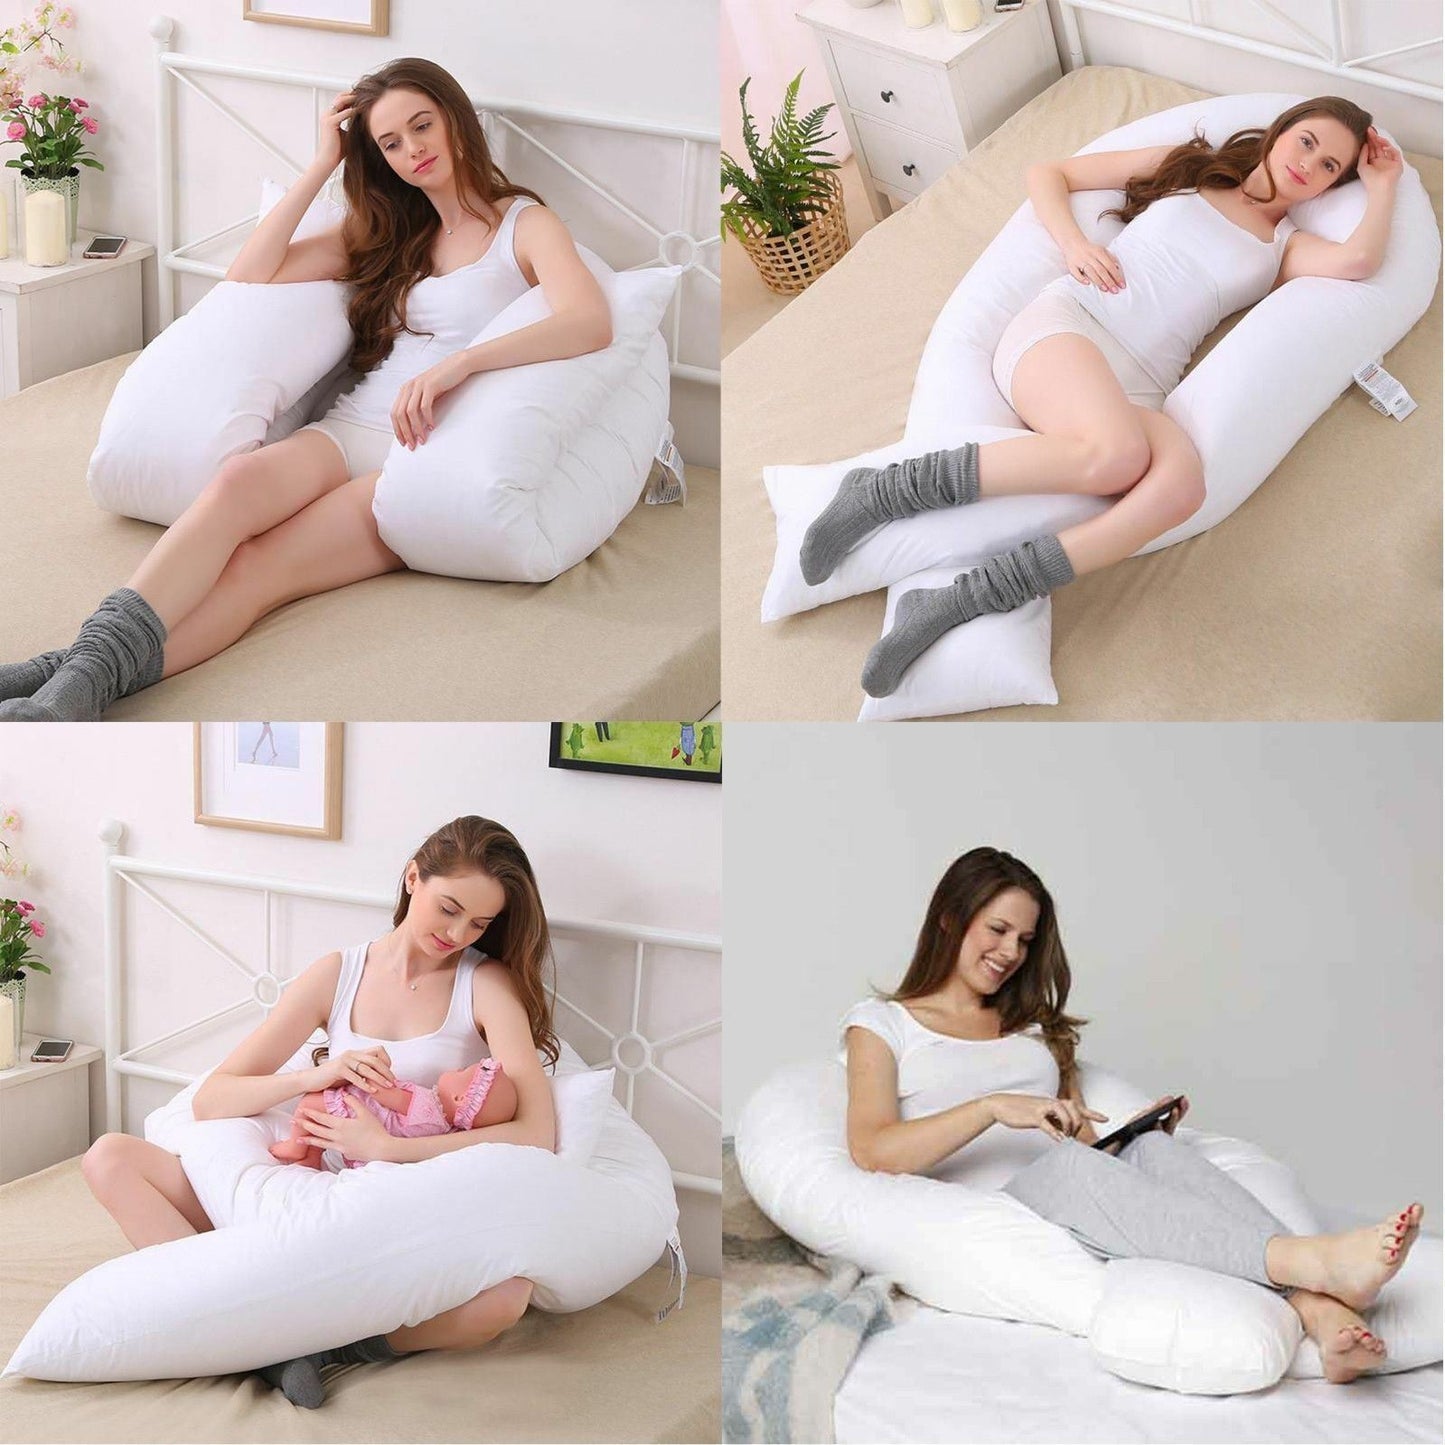 U Shaped Pillow Pregnancy Maternity Full Body Hollow Fibre Filling - TheComfortshop.co.ukPillows10721718955983thecomfortshopTheComfortshop.co.ukU shaped Pillow 9FTU Shaped 9FT Pillow OnlyU Shaped Pillow Pregnancy Maternity Full Body Hollow Fibre Filling - TheComfortshop.co.uk